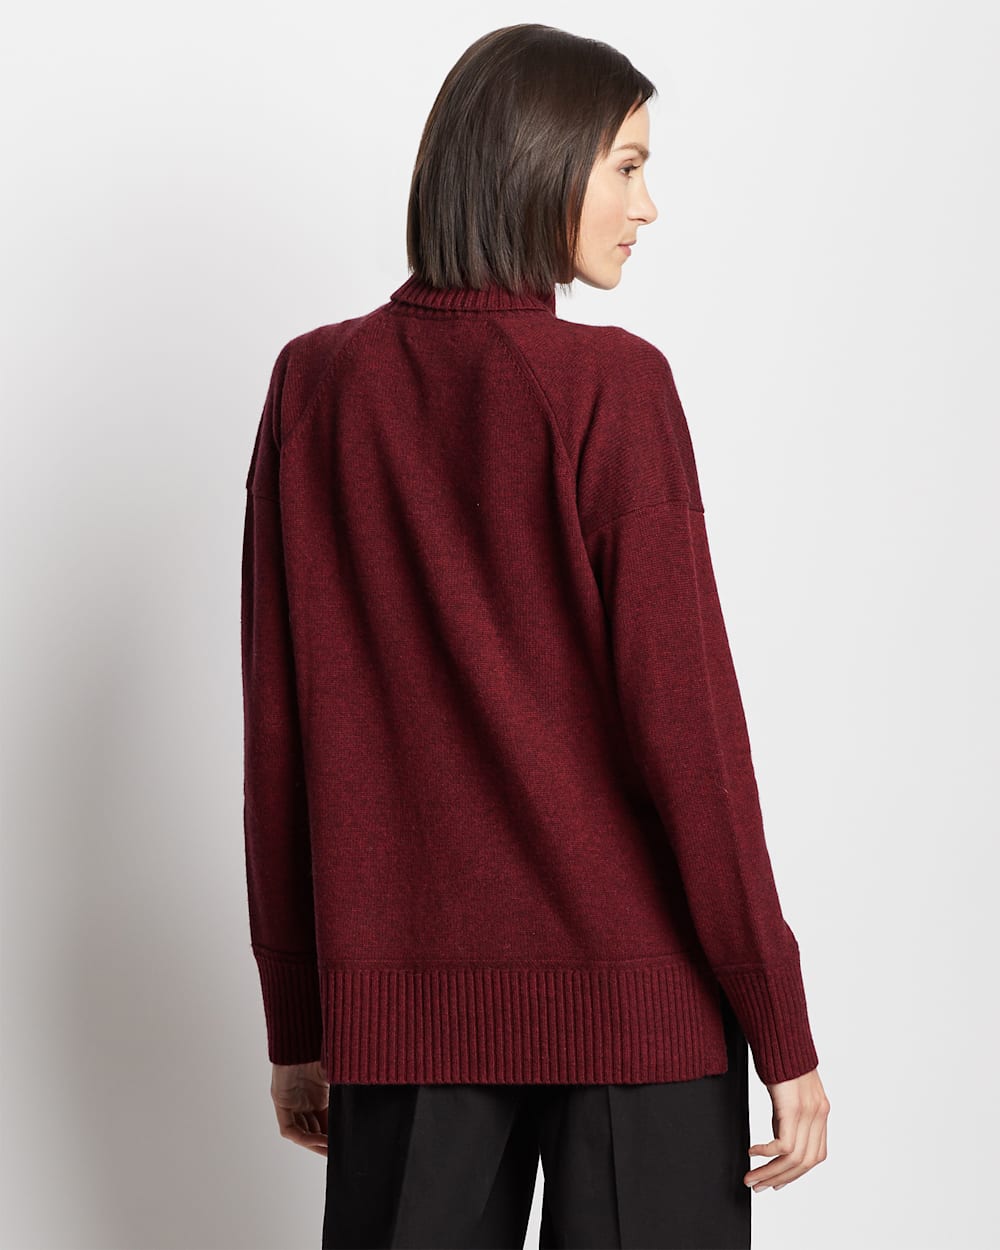 ALTERNATE VIEW OF WOMEN'S MERINO/CASHMERE OVERSIZED TURTLENECK IN BERRY PRESERVE image number 4